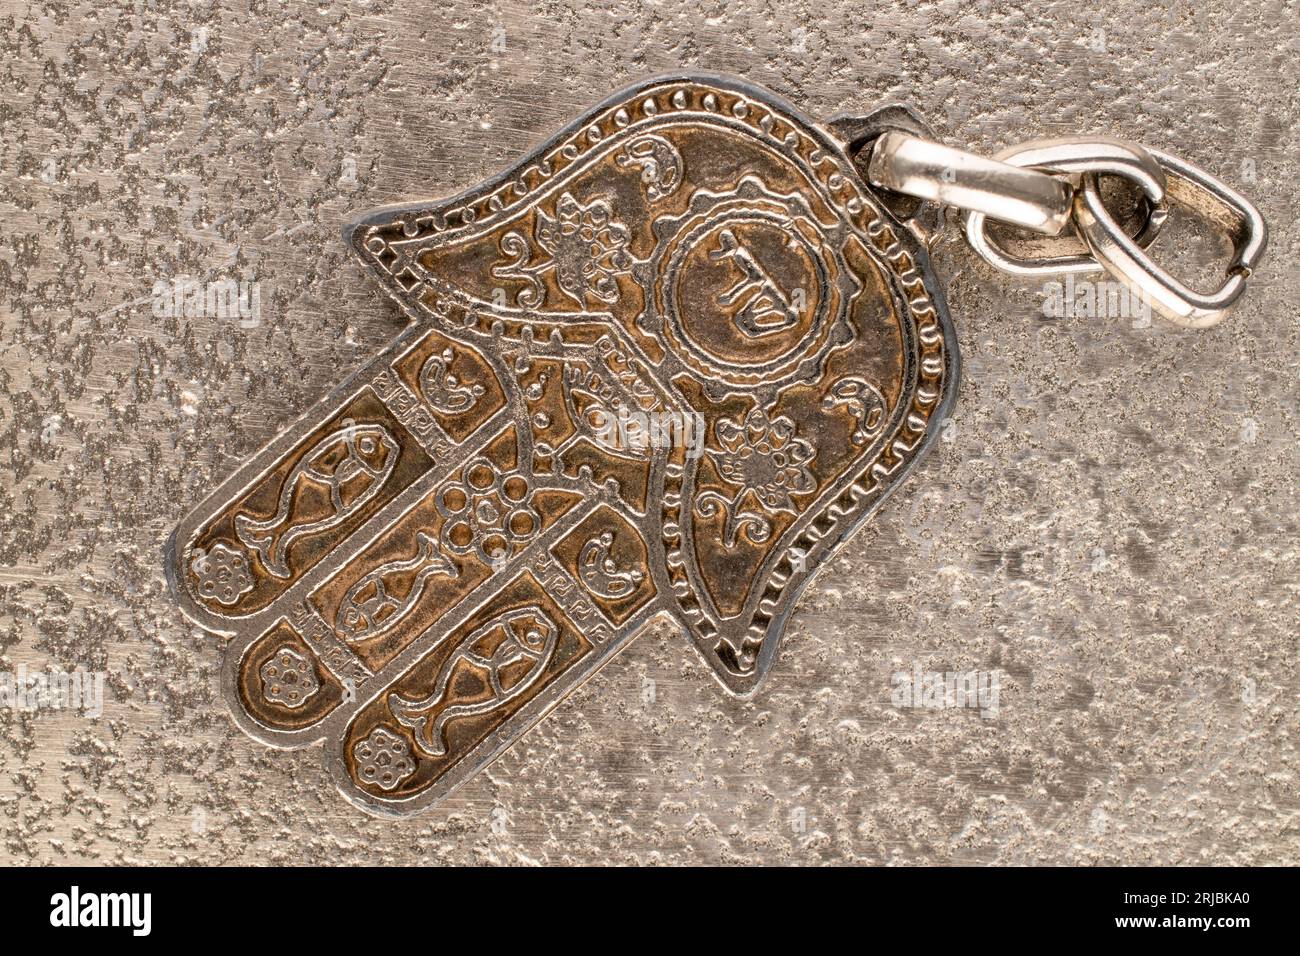 One metal keyring, Jewish 'Hand of Miriam' on metal, close-up, top view. Stock Photo